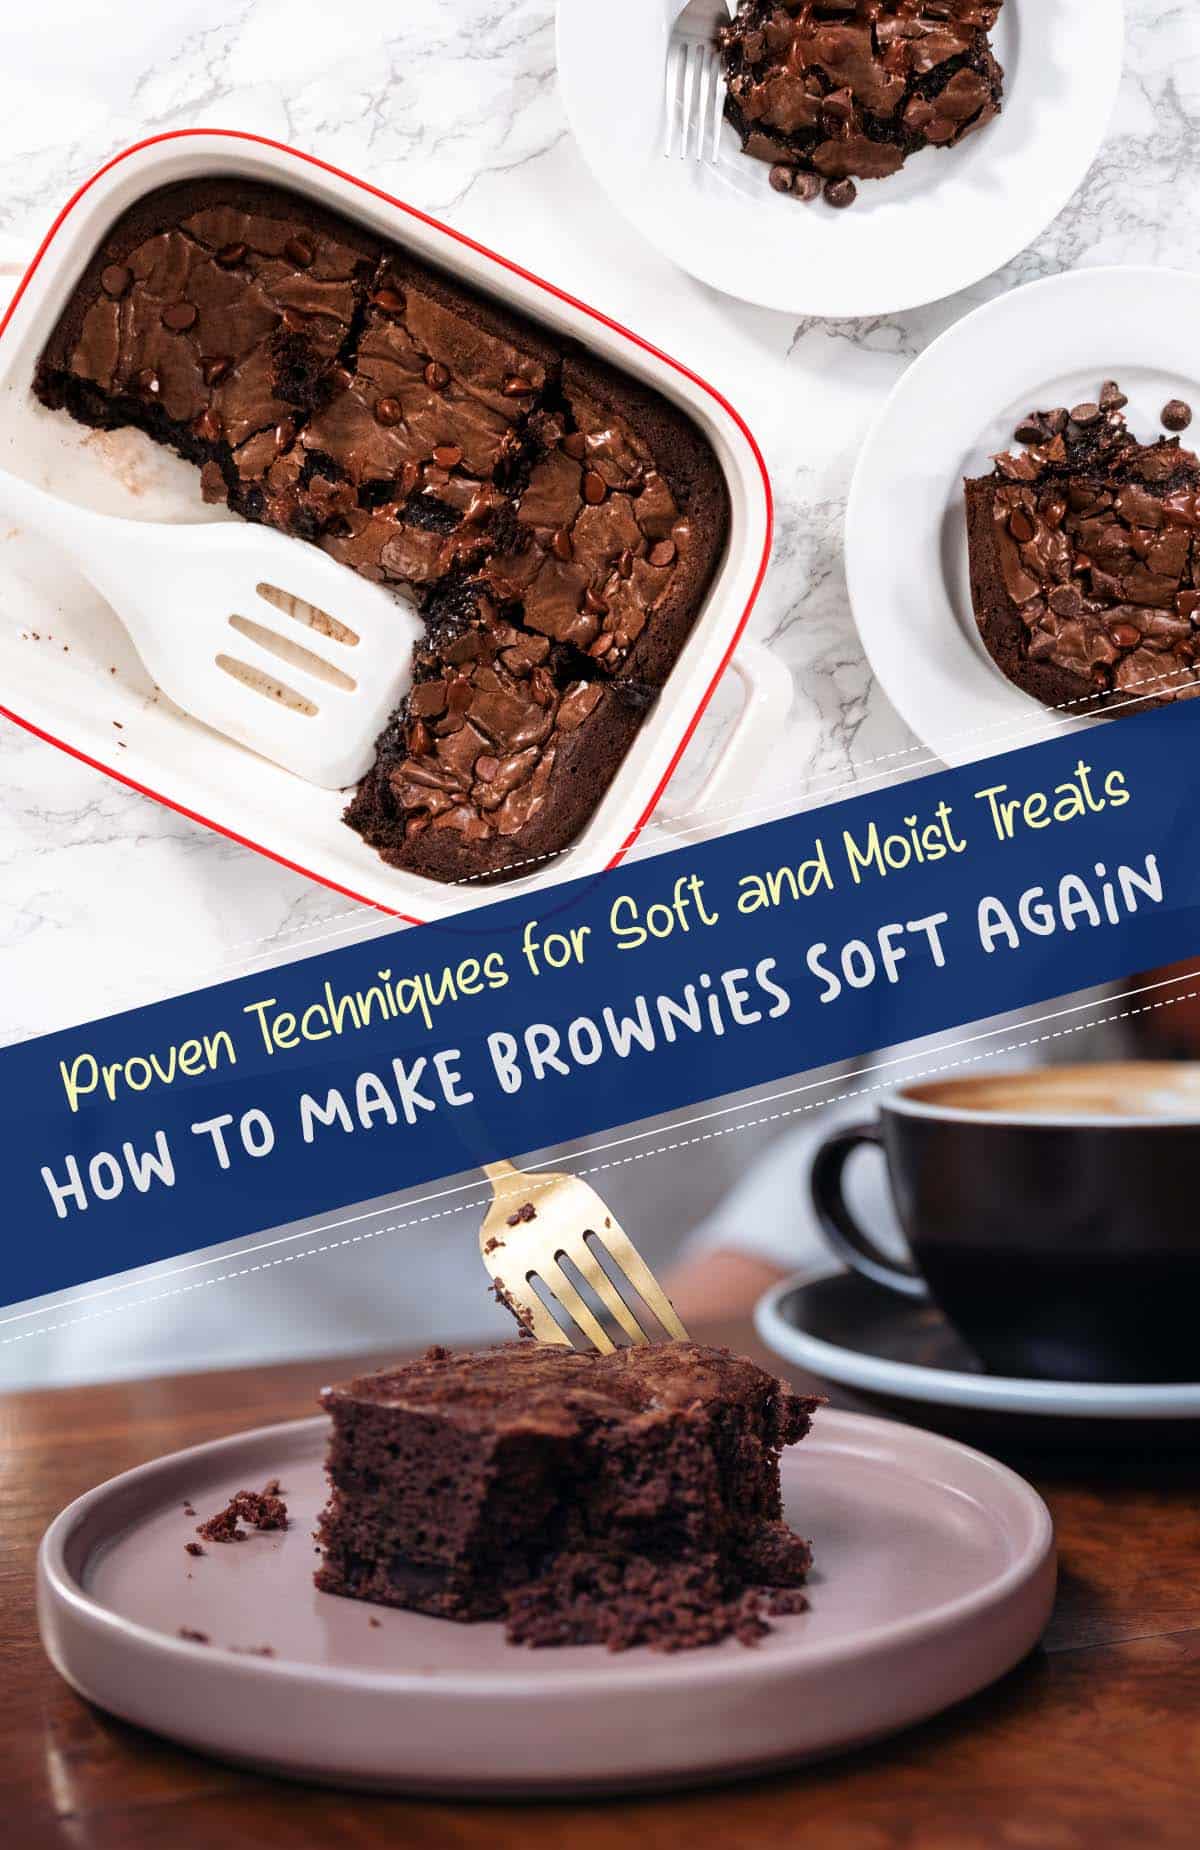 Learn quick, easy steps to make brownies soft again! Follow our expert tips to bring back that moist, delicious texture.